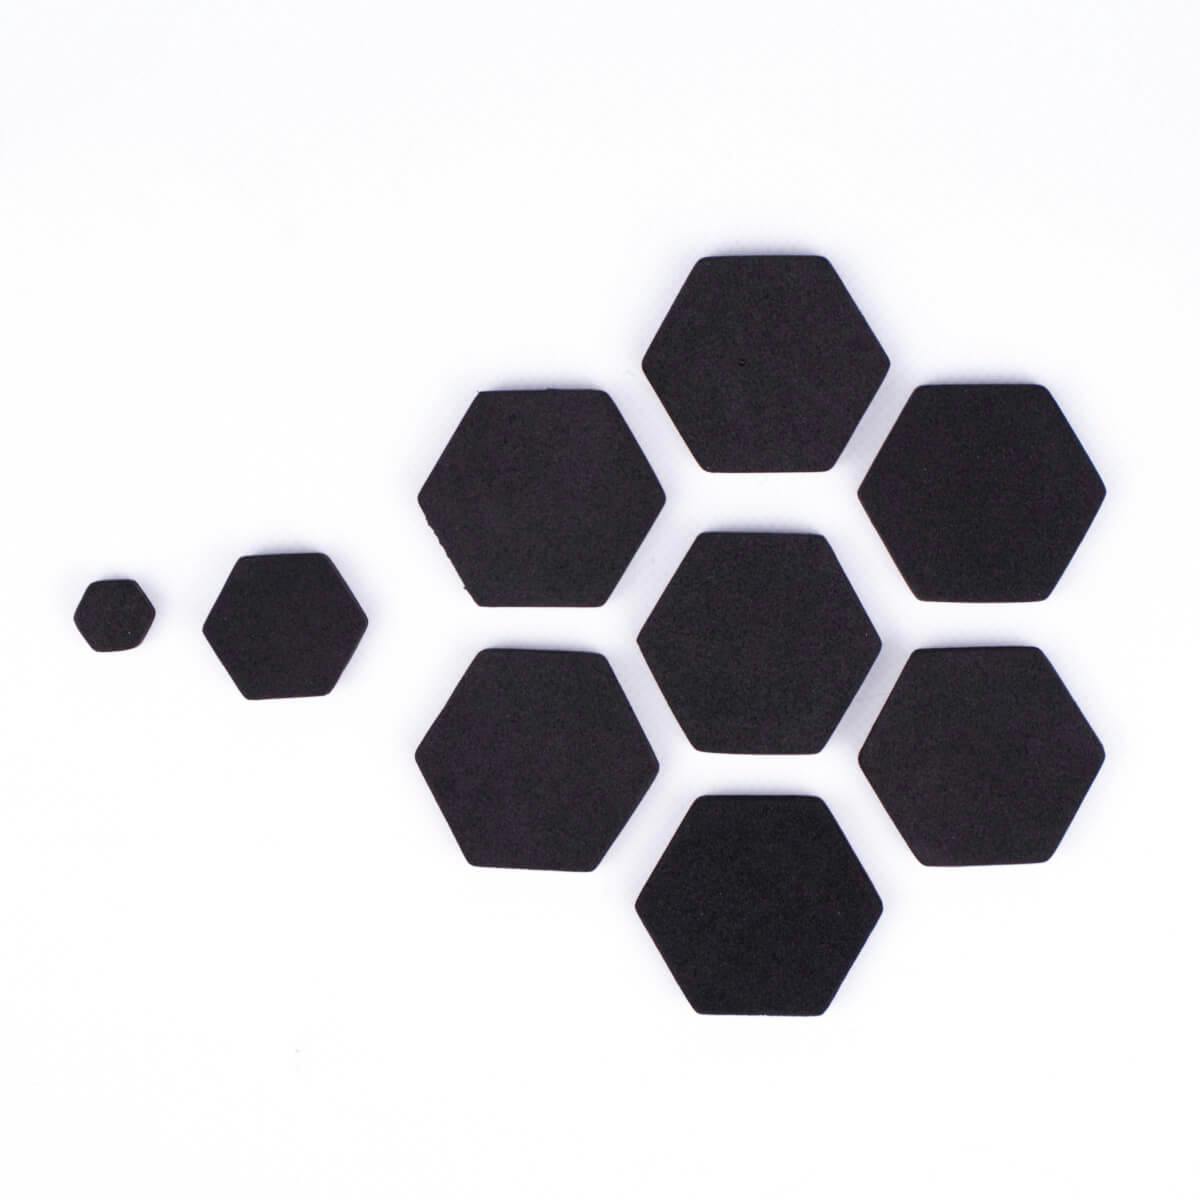 Showing some large 30mm foam hexagons